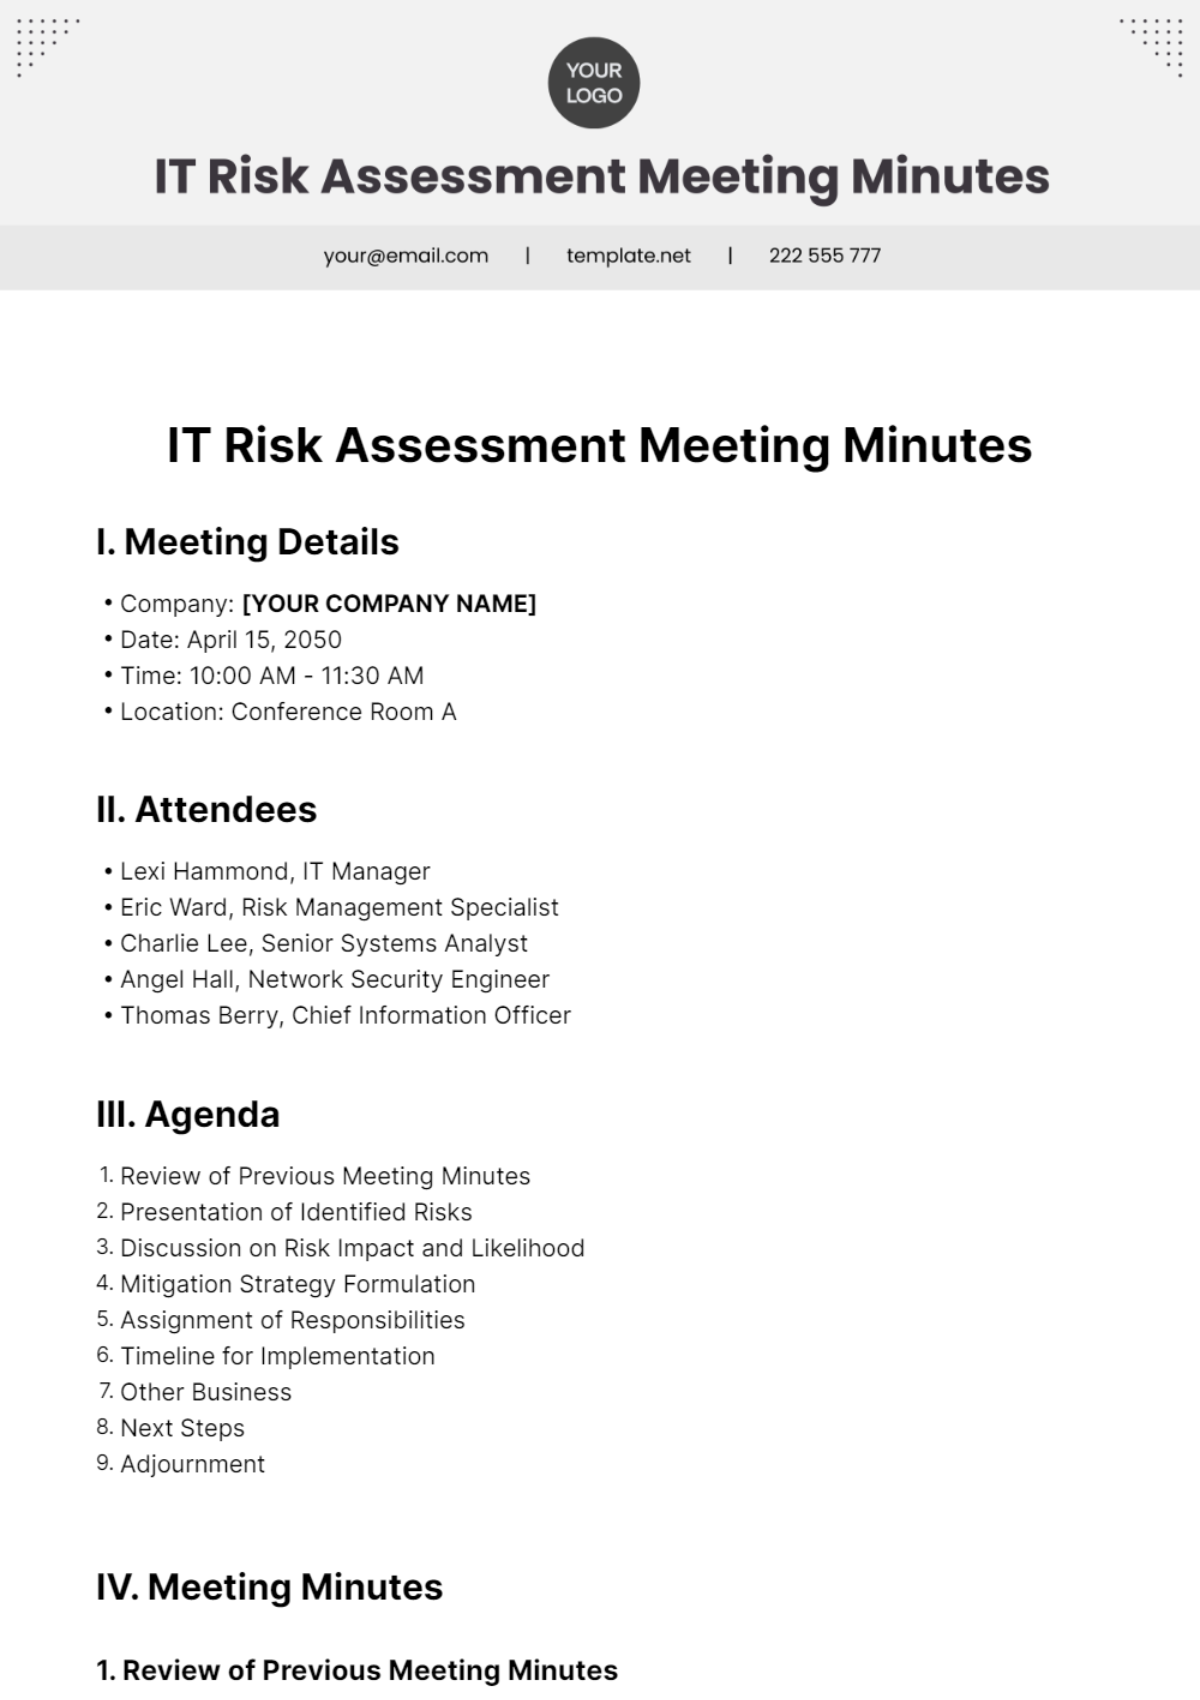 IT Risk Assessment Meeting Minutes Template